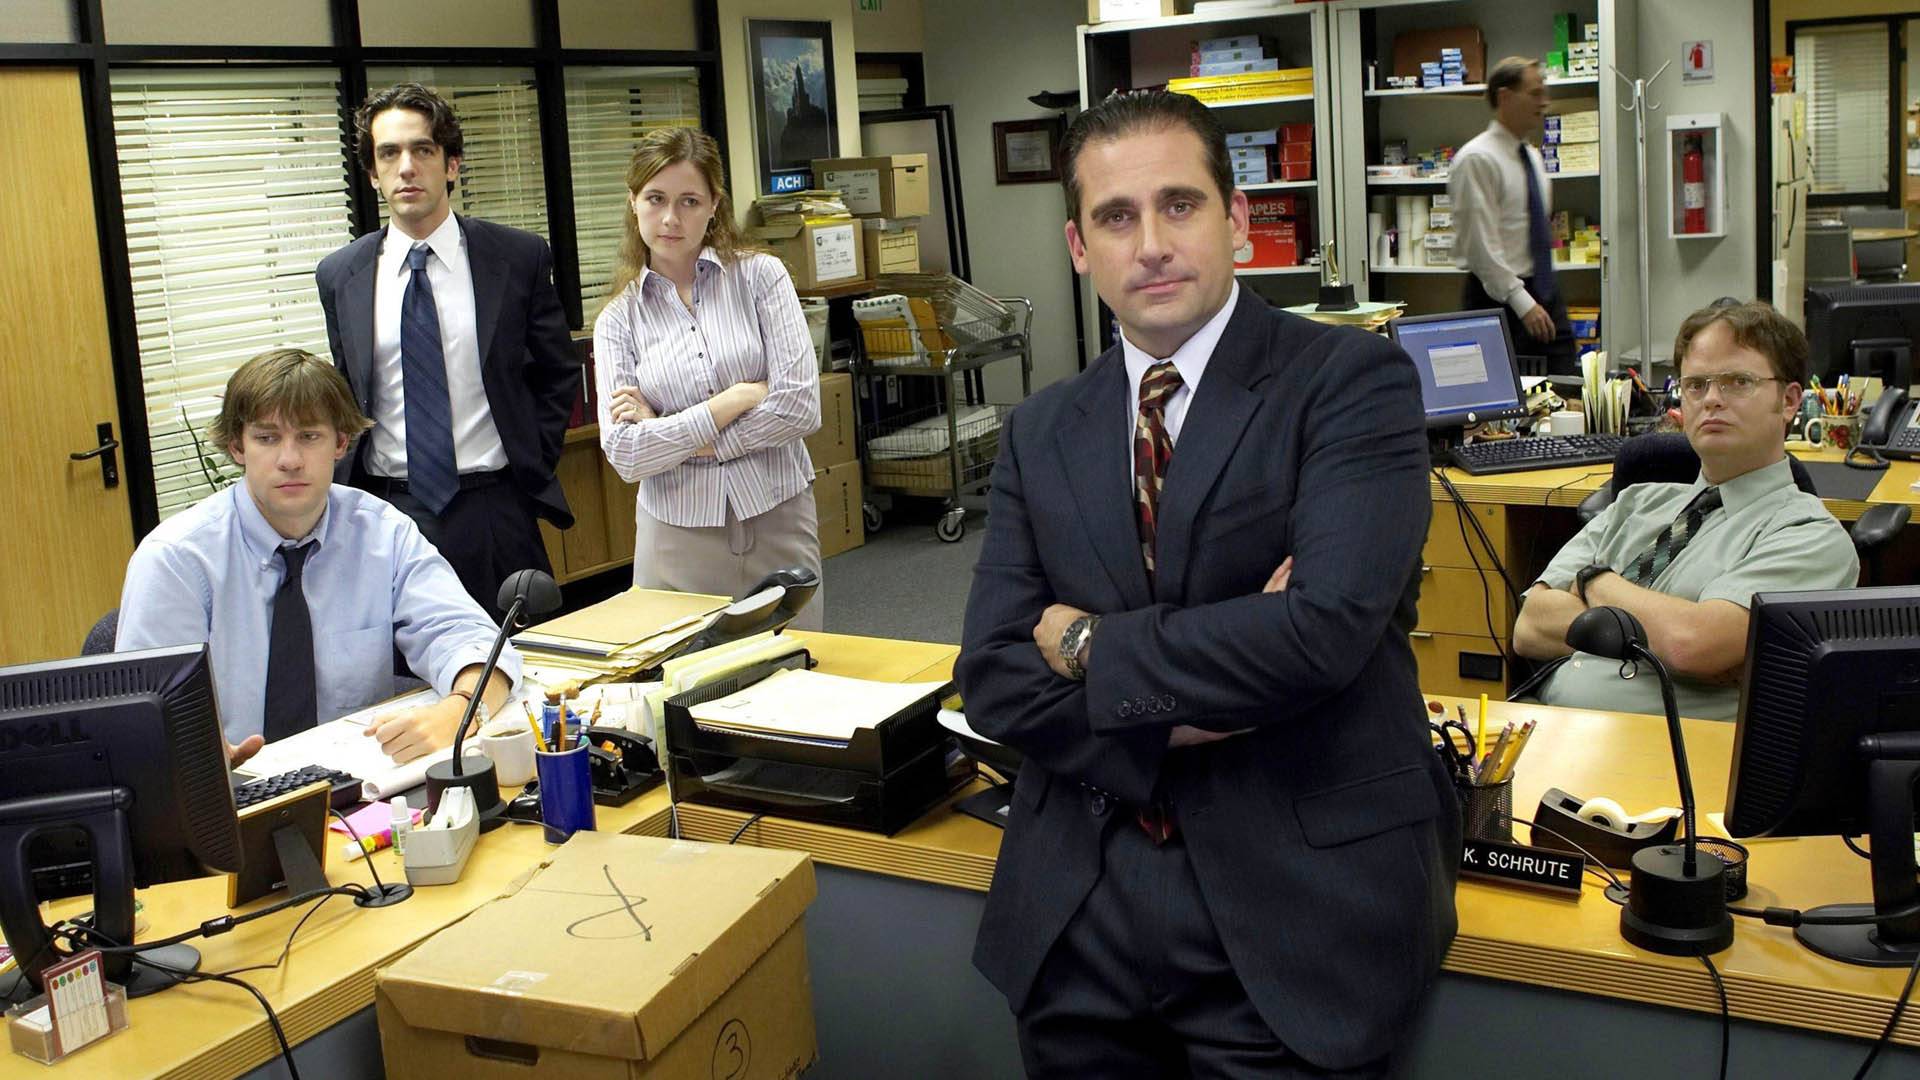 The Office 2019 - NBC Revival 'Impossible In Today's Climate' Says ...